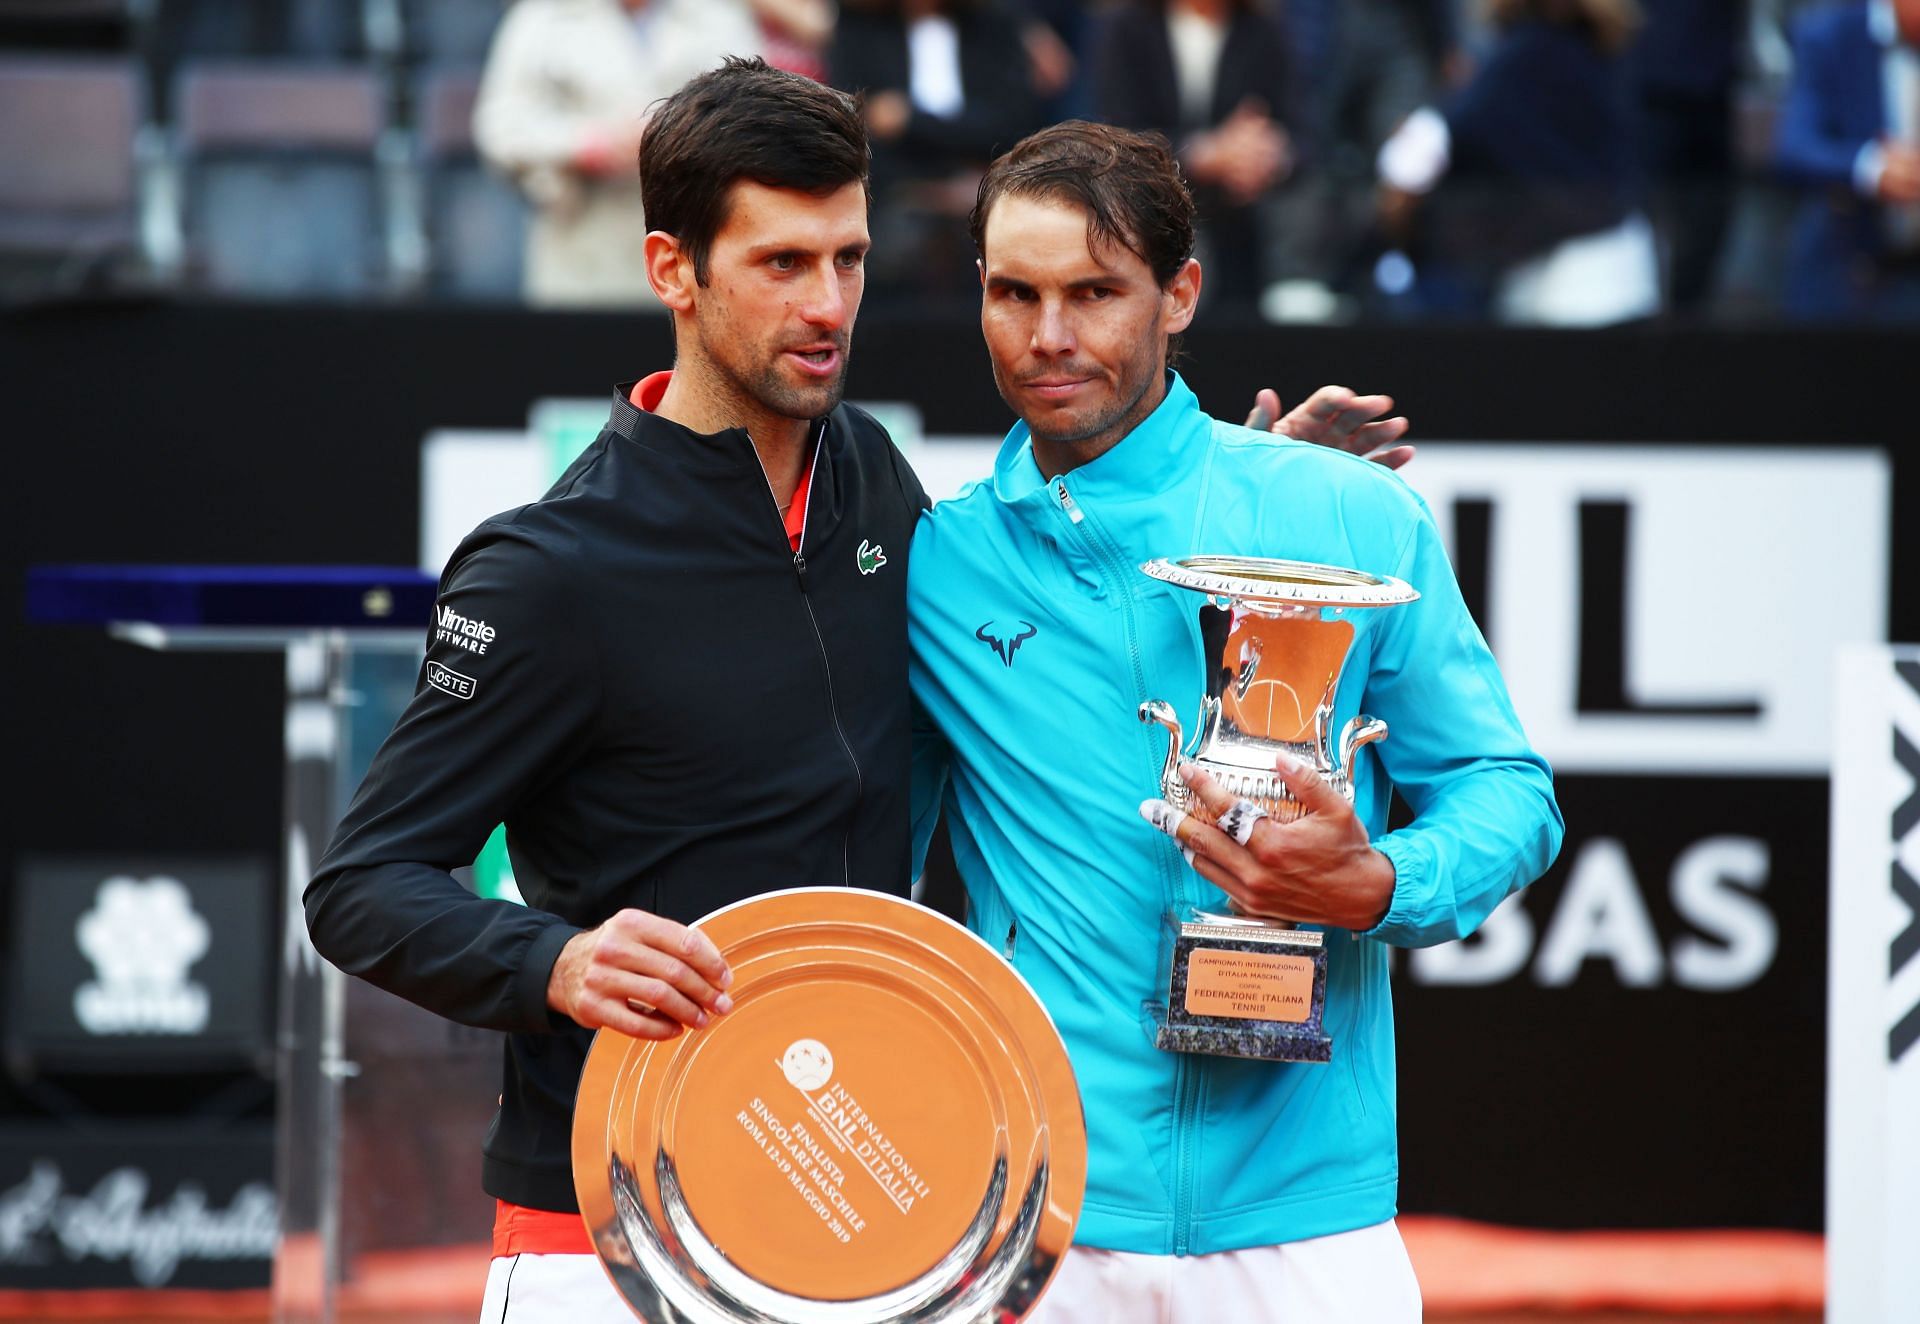 Novak Djokovic and Rafael Nadal were the two most searched athletes in 2022